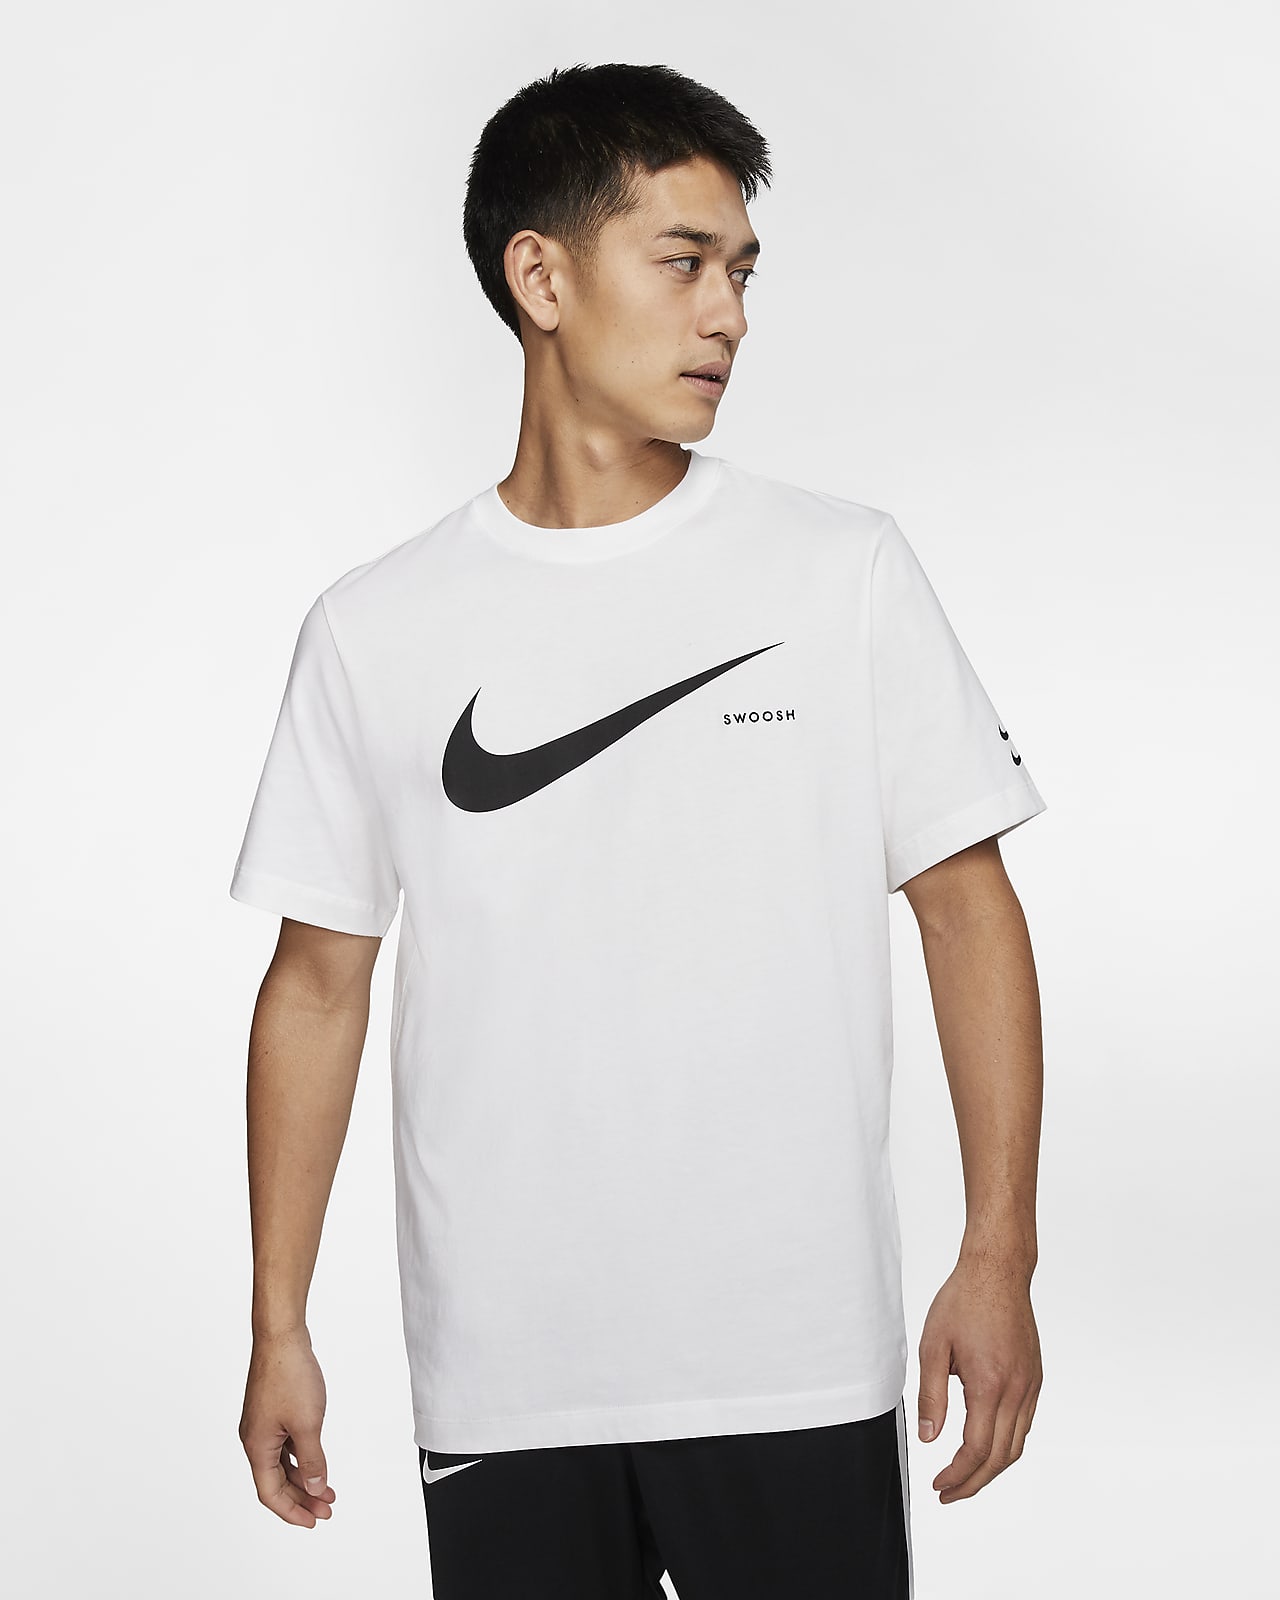 nike shirt with swoosh in middle